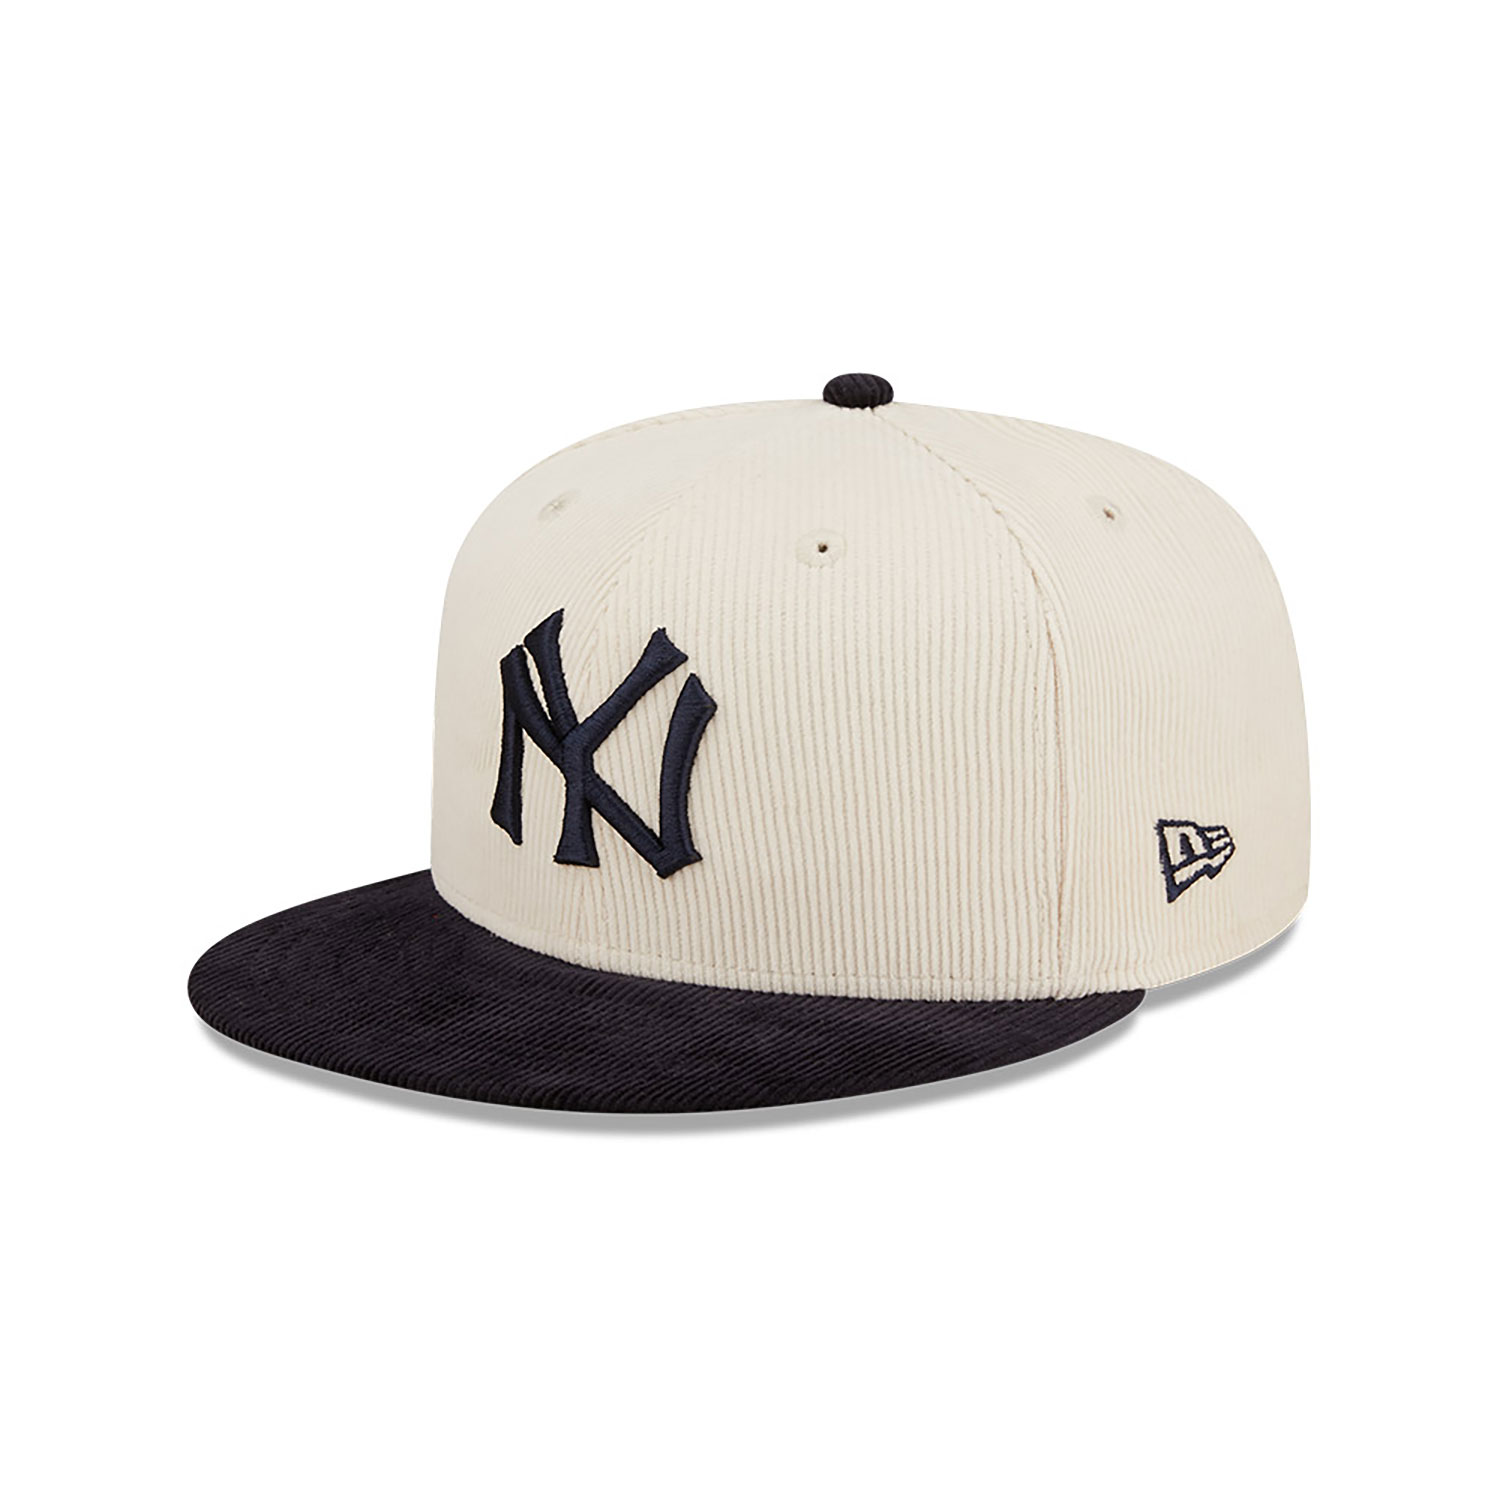 Official New Era New York Yankees MLB Cooperstown White 59FIFTY Fitted ...